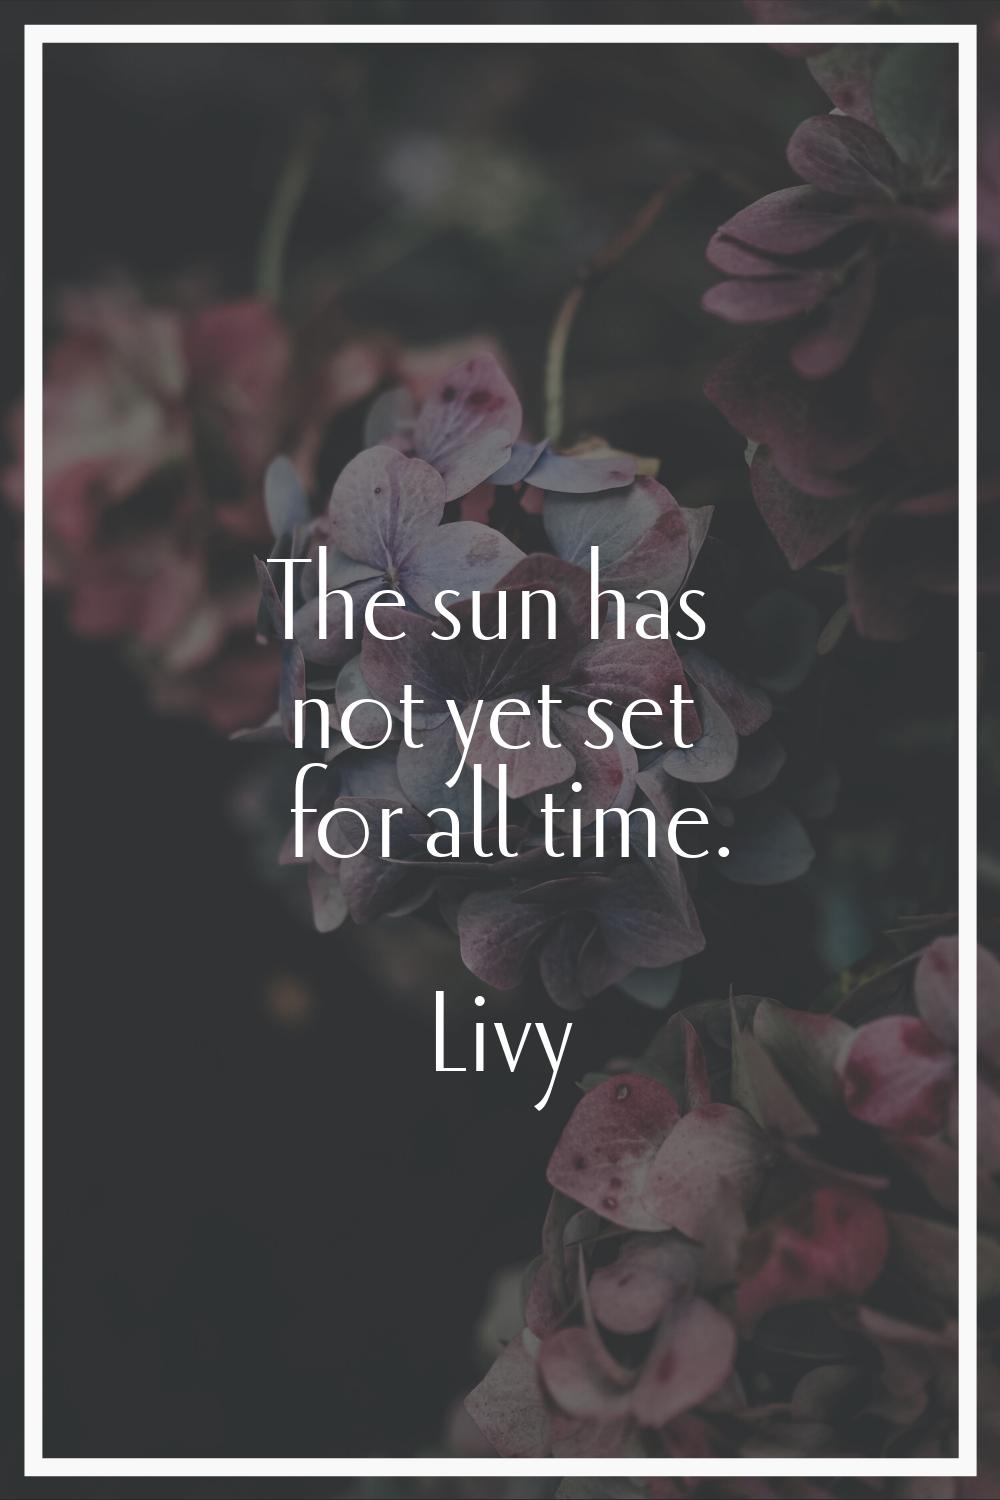 The sun has not yet set for all time.